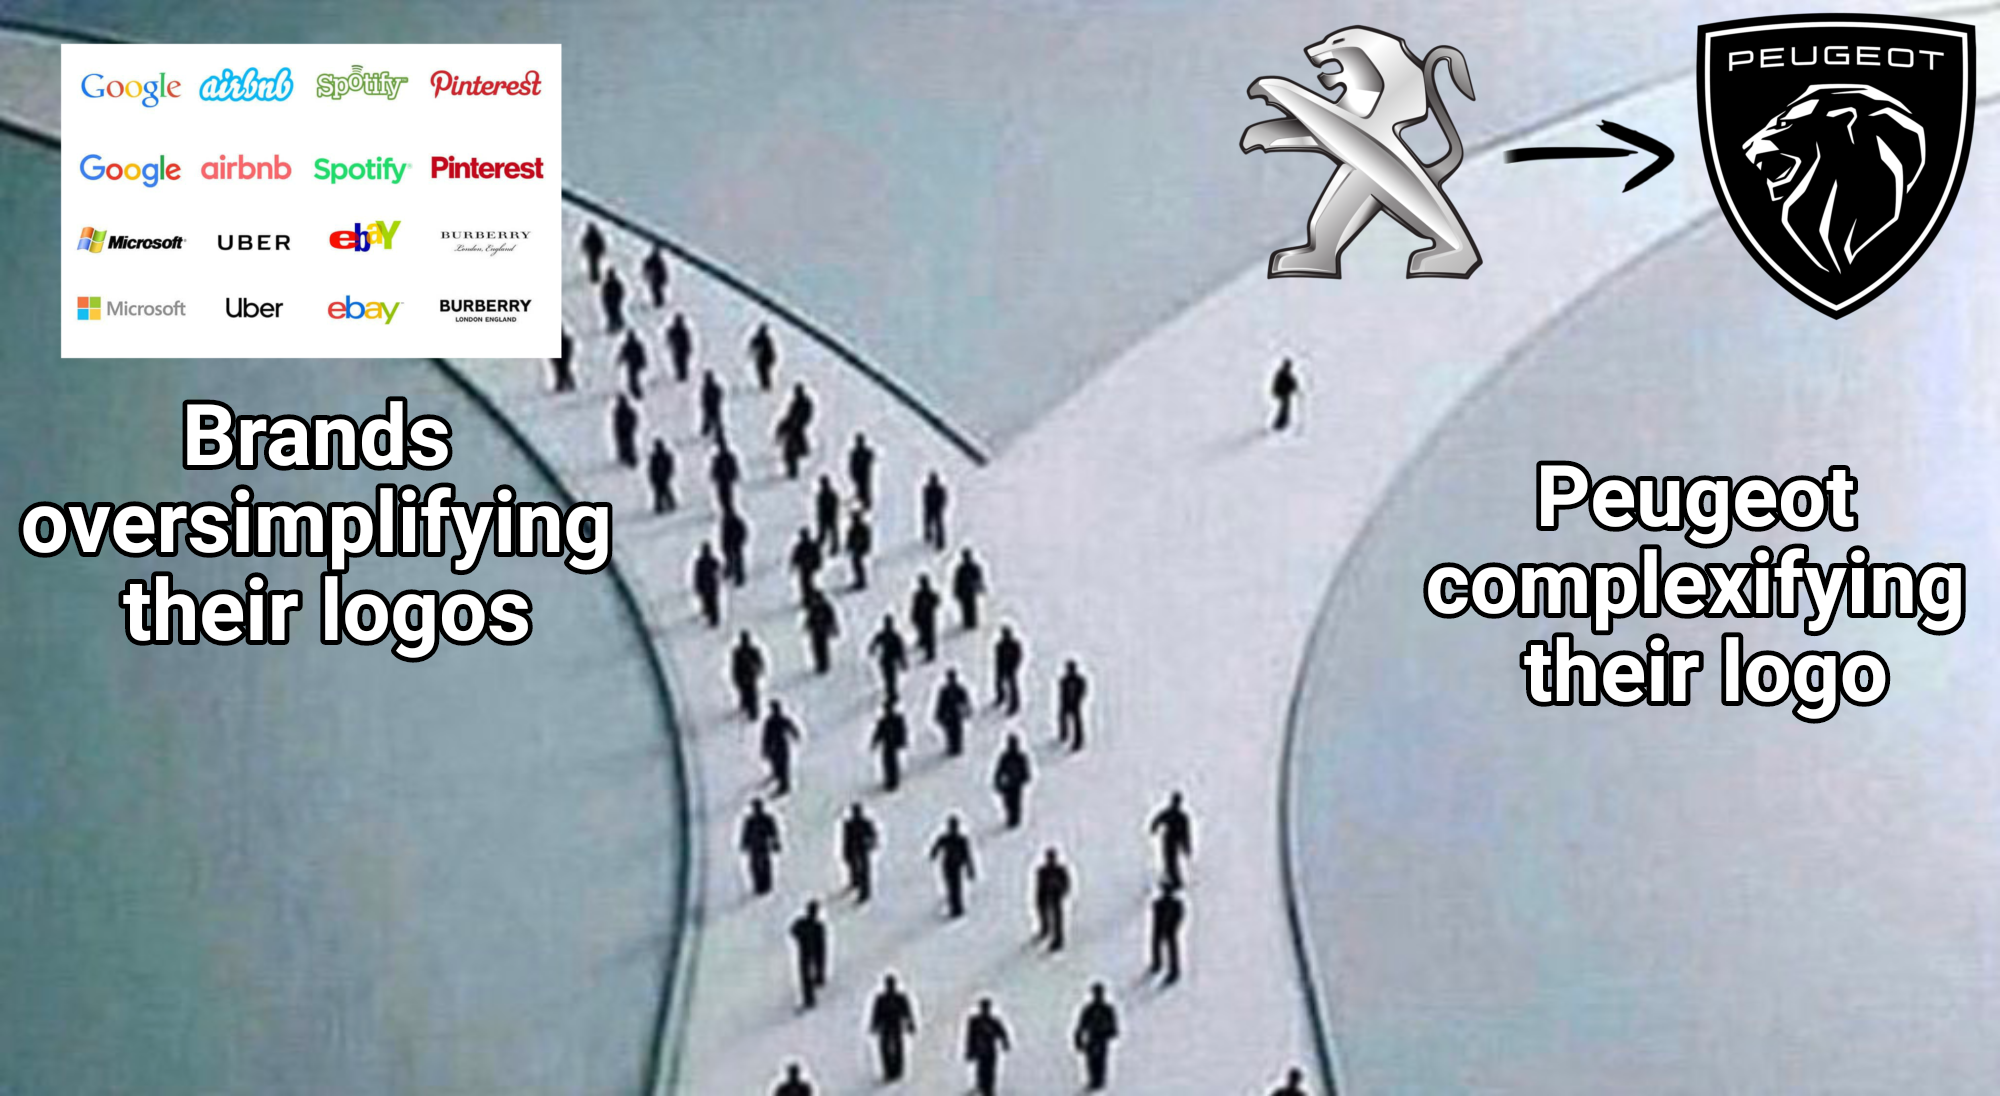 dank memes - stay on the right path even if you have to walk alone image - Peugeot Google hart aputy Pinterest Google airbnb Spotify Pinterest Mies Uber by Microsoft Uber ebay Burberry Brands oversimplifying their logos Peugeot complexifying their logo